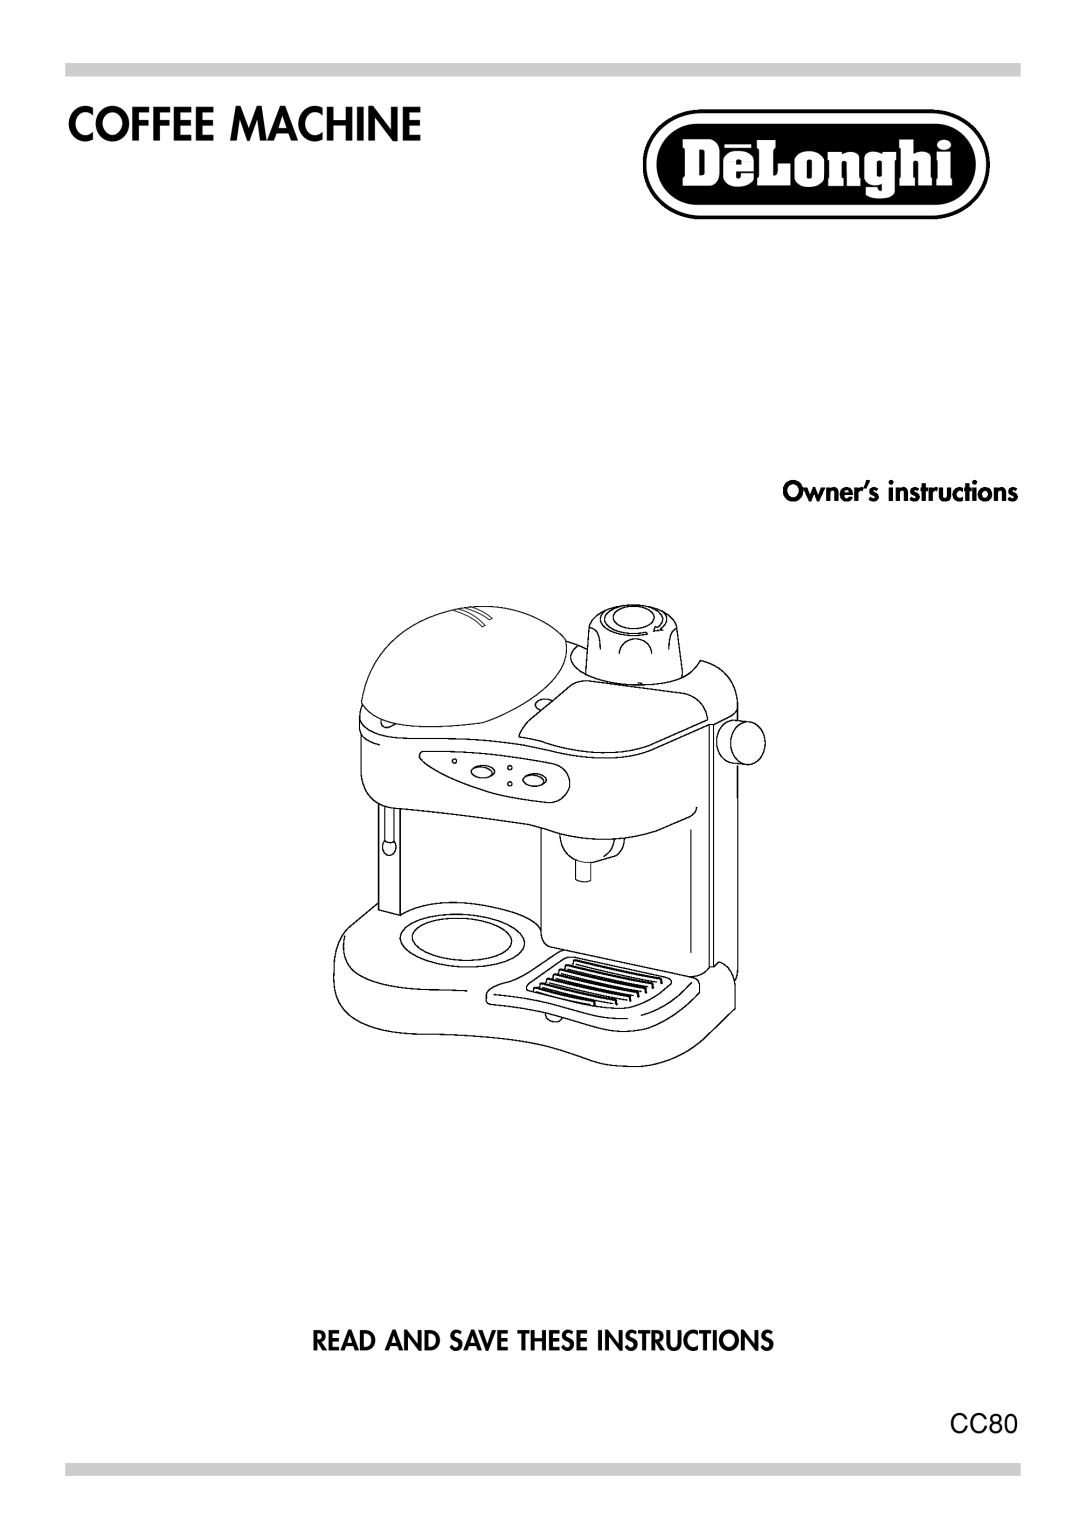 DeLonghi CC80 manual Coffee Machine, Owner’s instructions READ AND SAVE THESE INSTRUCTIONS 